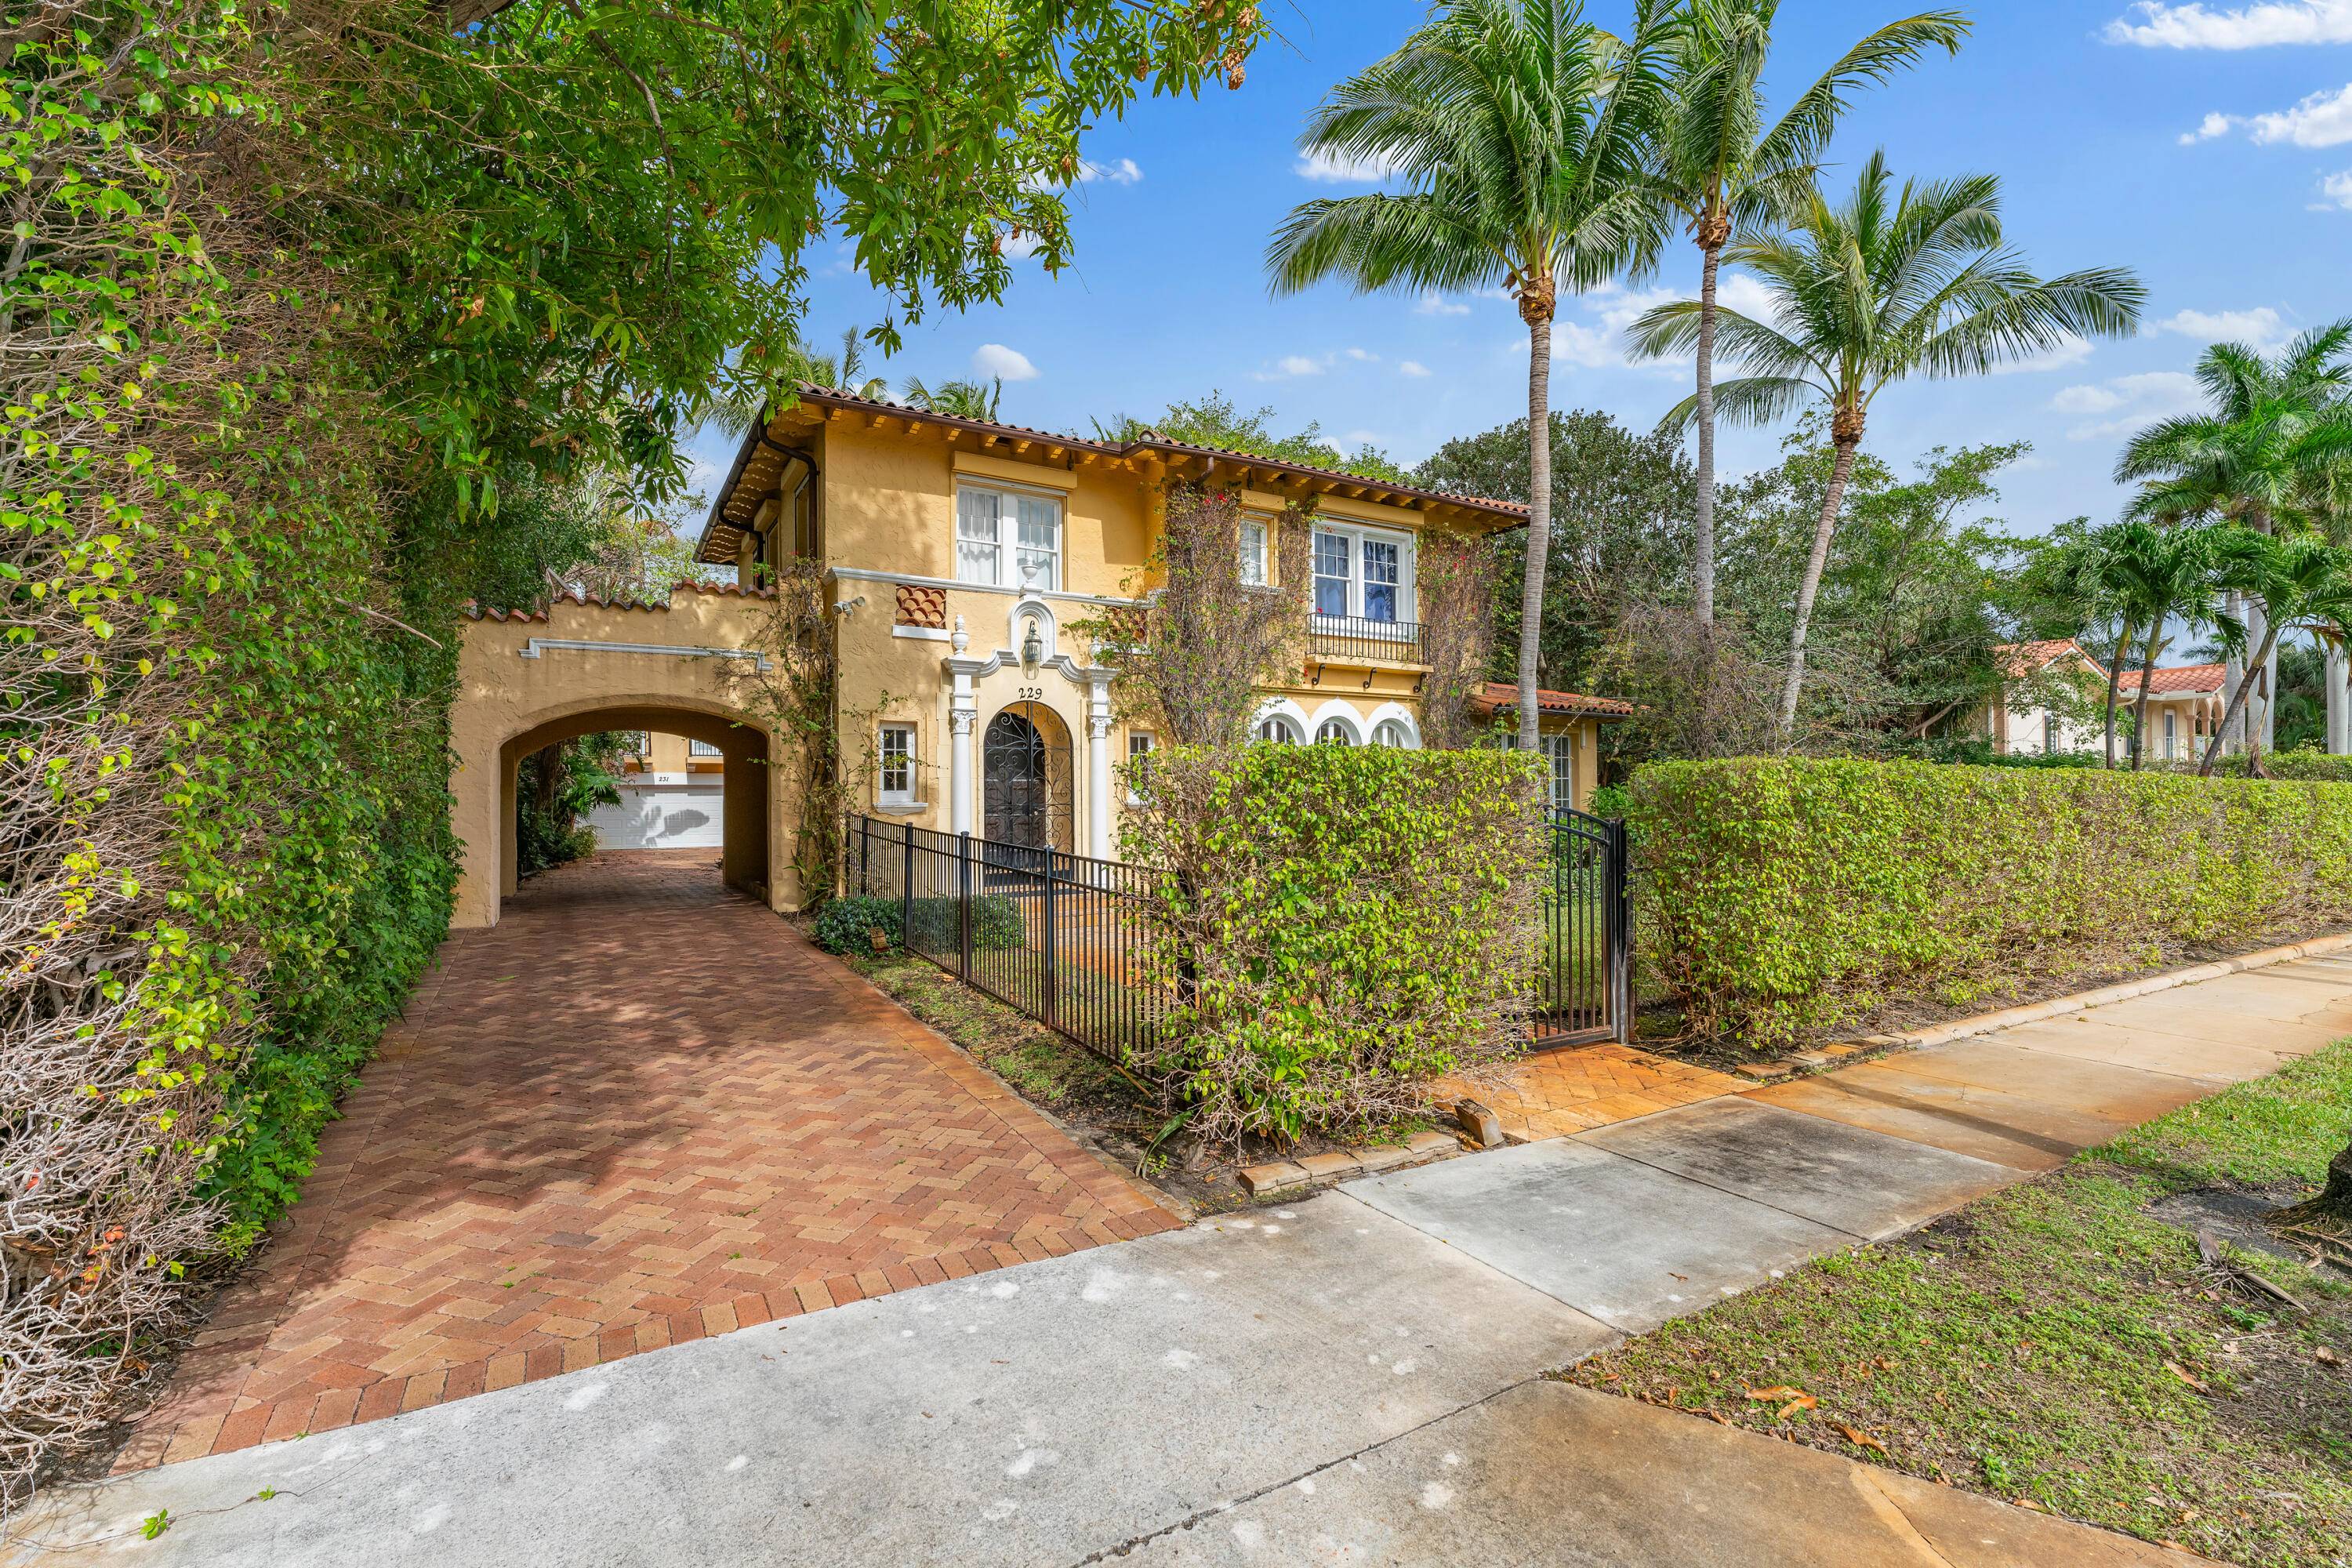 This beautiful Mediterranean style pool home is on a 1 3rd acre lot is within walking distance to the Intracoastal Waterway fine shops and dining in the heart of Palm ...